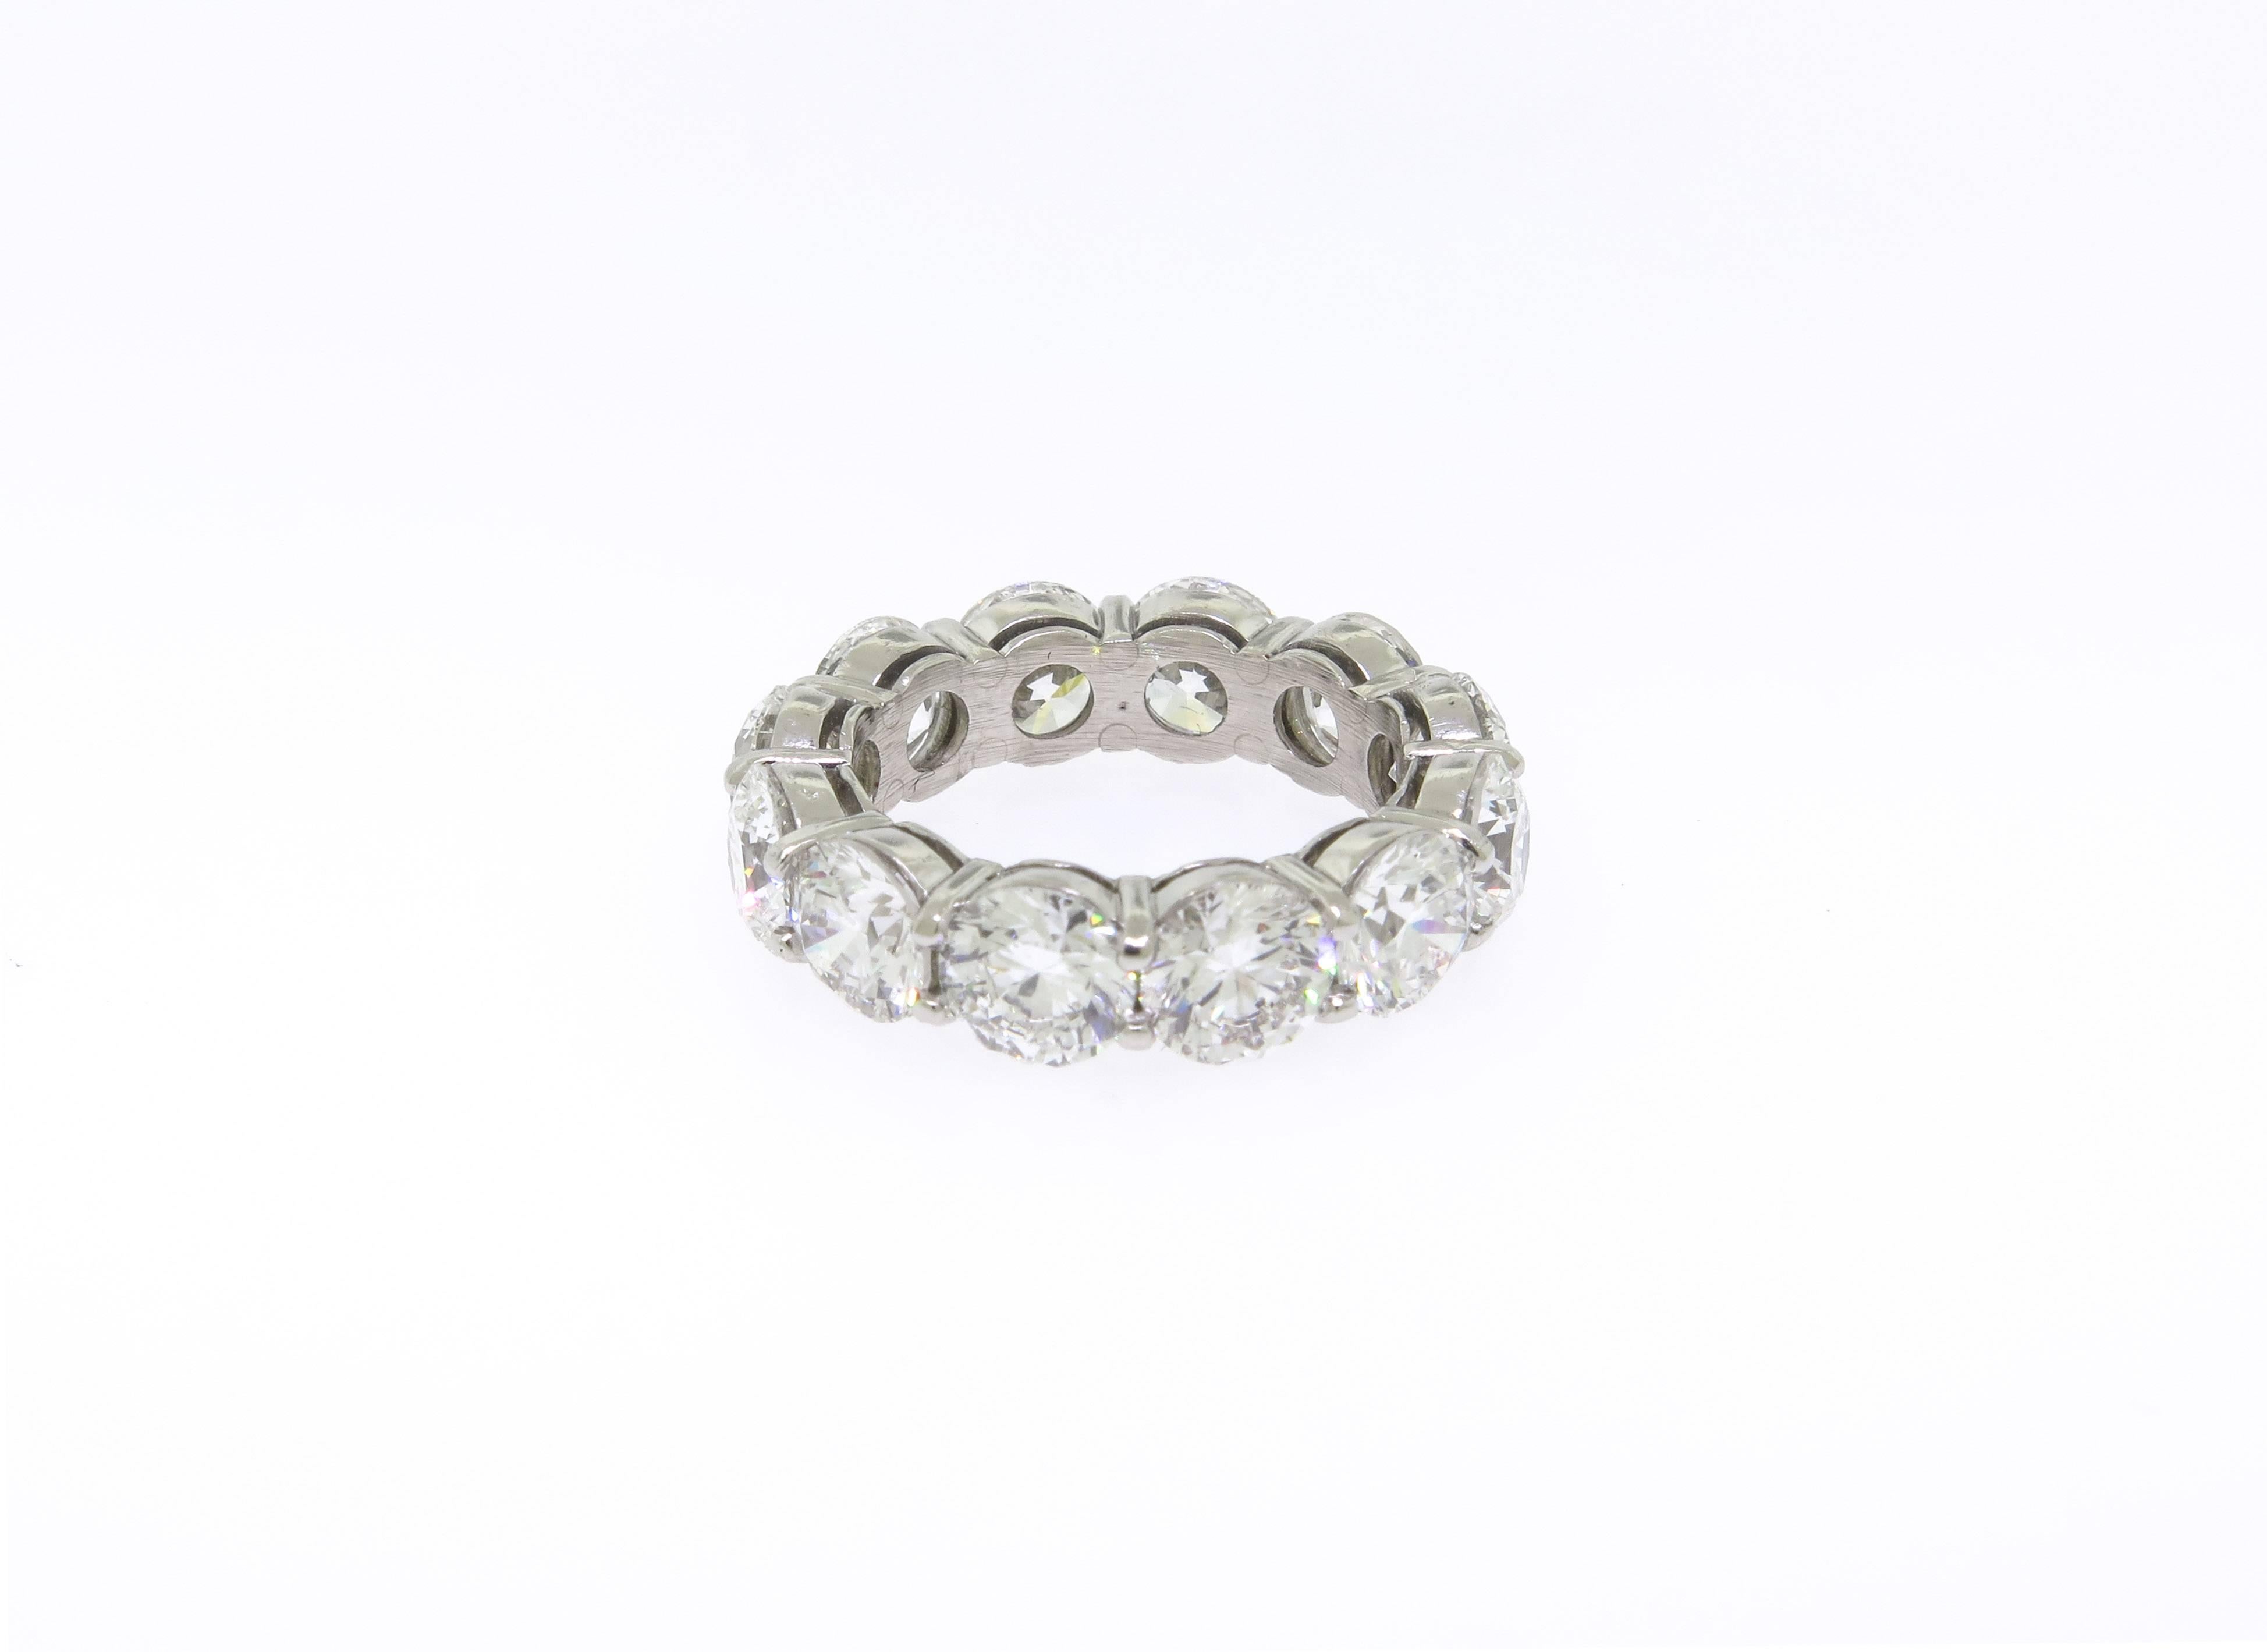 This platinum eternity wedding band features 12 prong set round brilliant cut diamonds. The diamonds are F color, SI1 clarity and a total weight of 8.52 carats. Size 5.5 GIA certified.